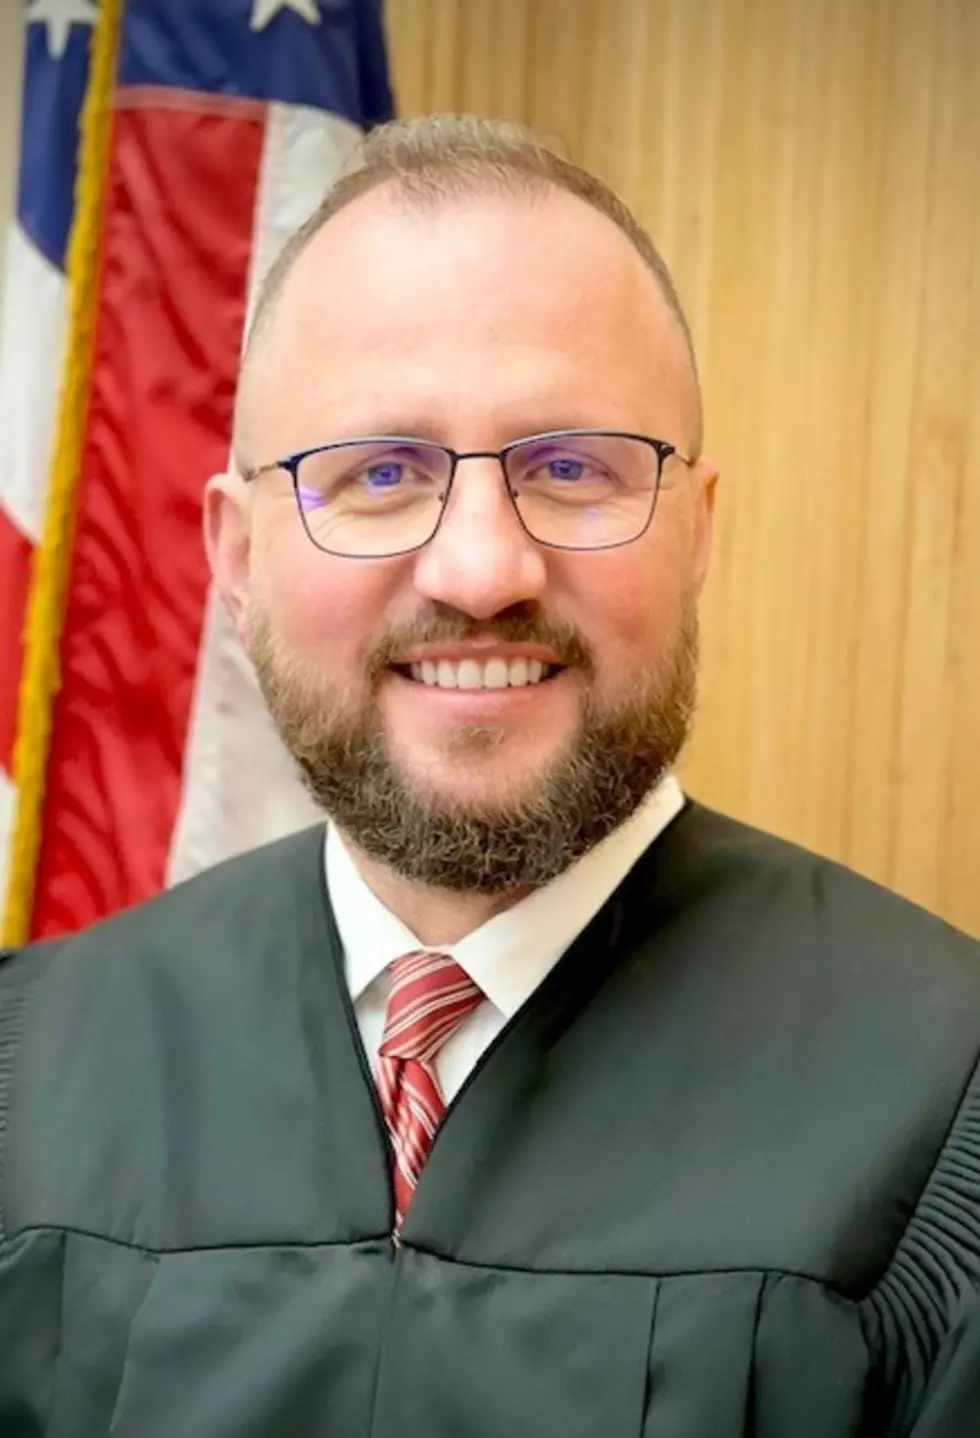 Tri-Cities Judge Named to 9th US Circuit Court of Appeals